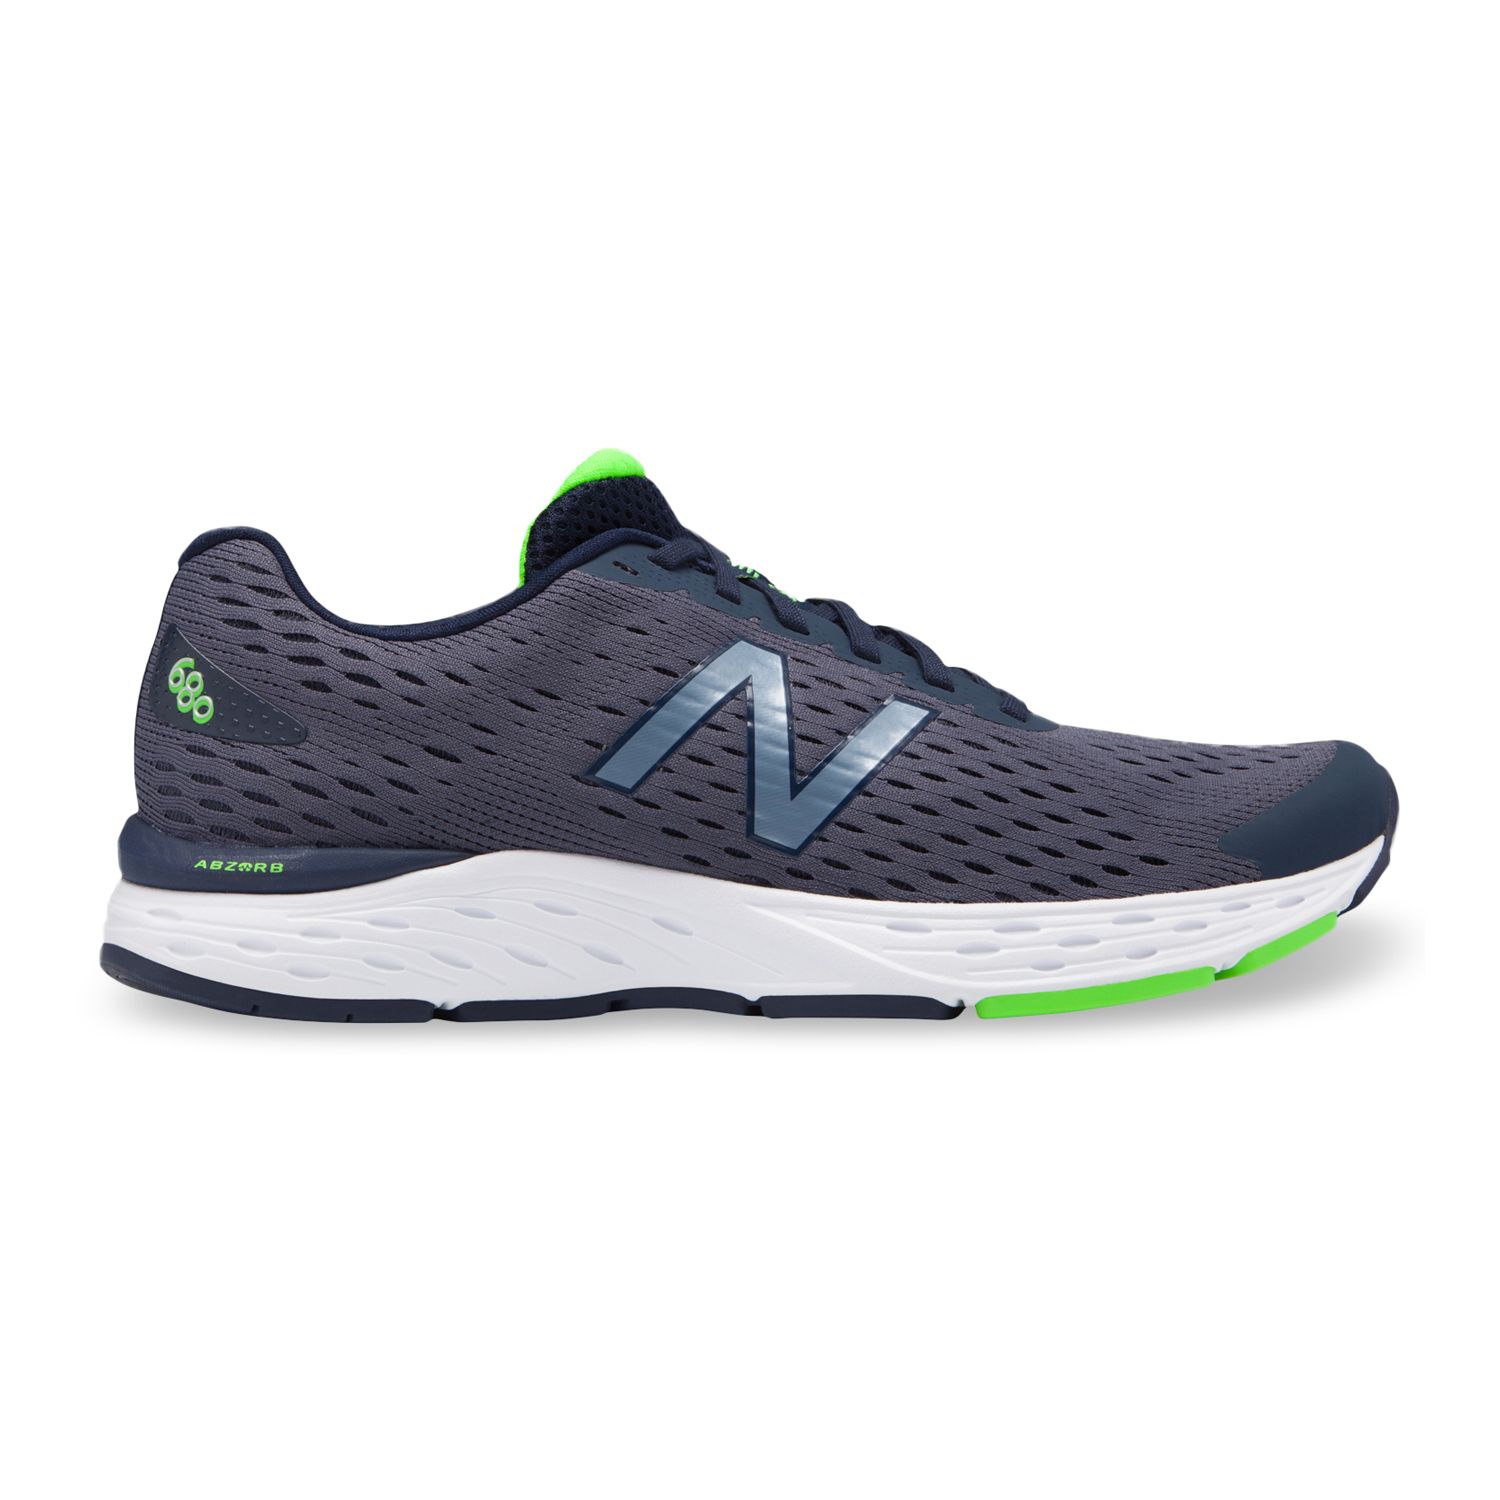 new balance shoes offer